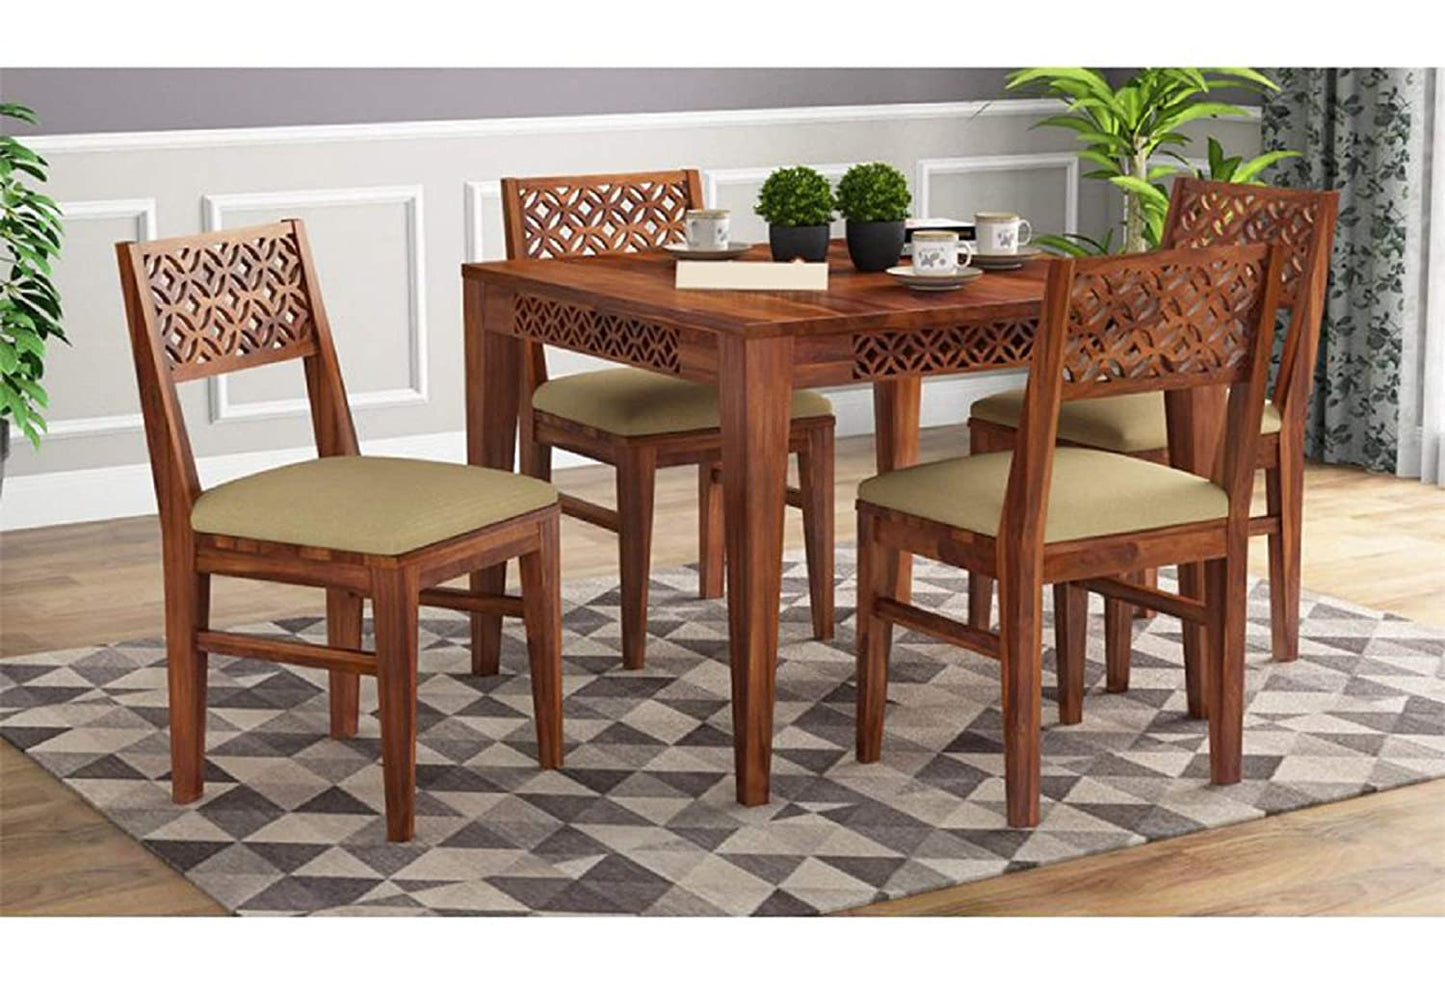 WeeHom Furniture Sheesham Wood CNC 4 Seater Cream Cushion Dining Set of Wooden Dining Table with Chairs for Living Room